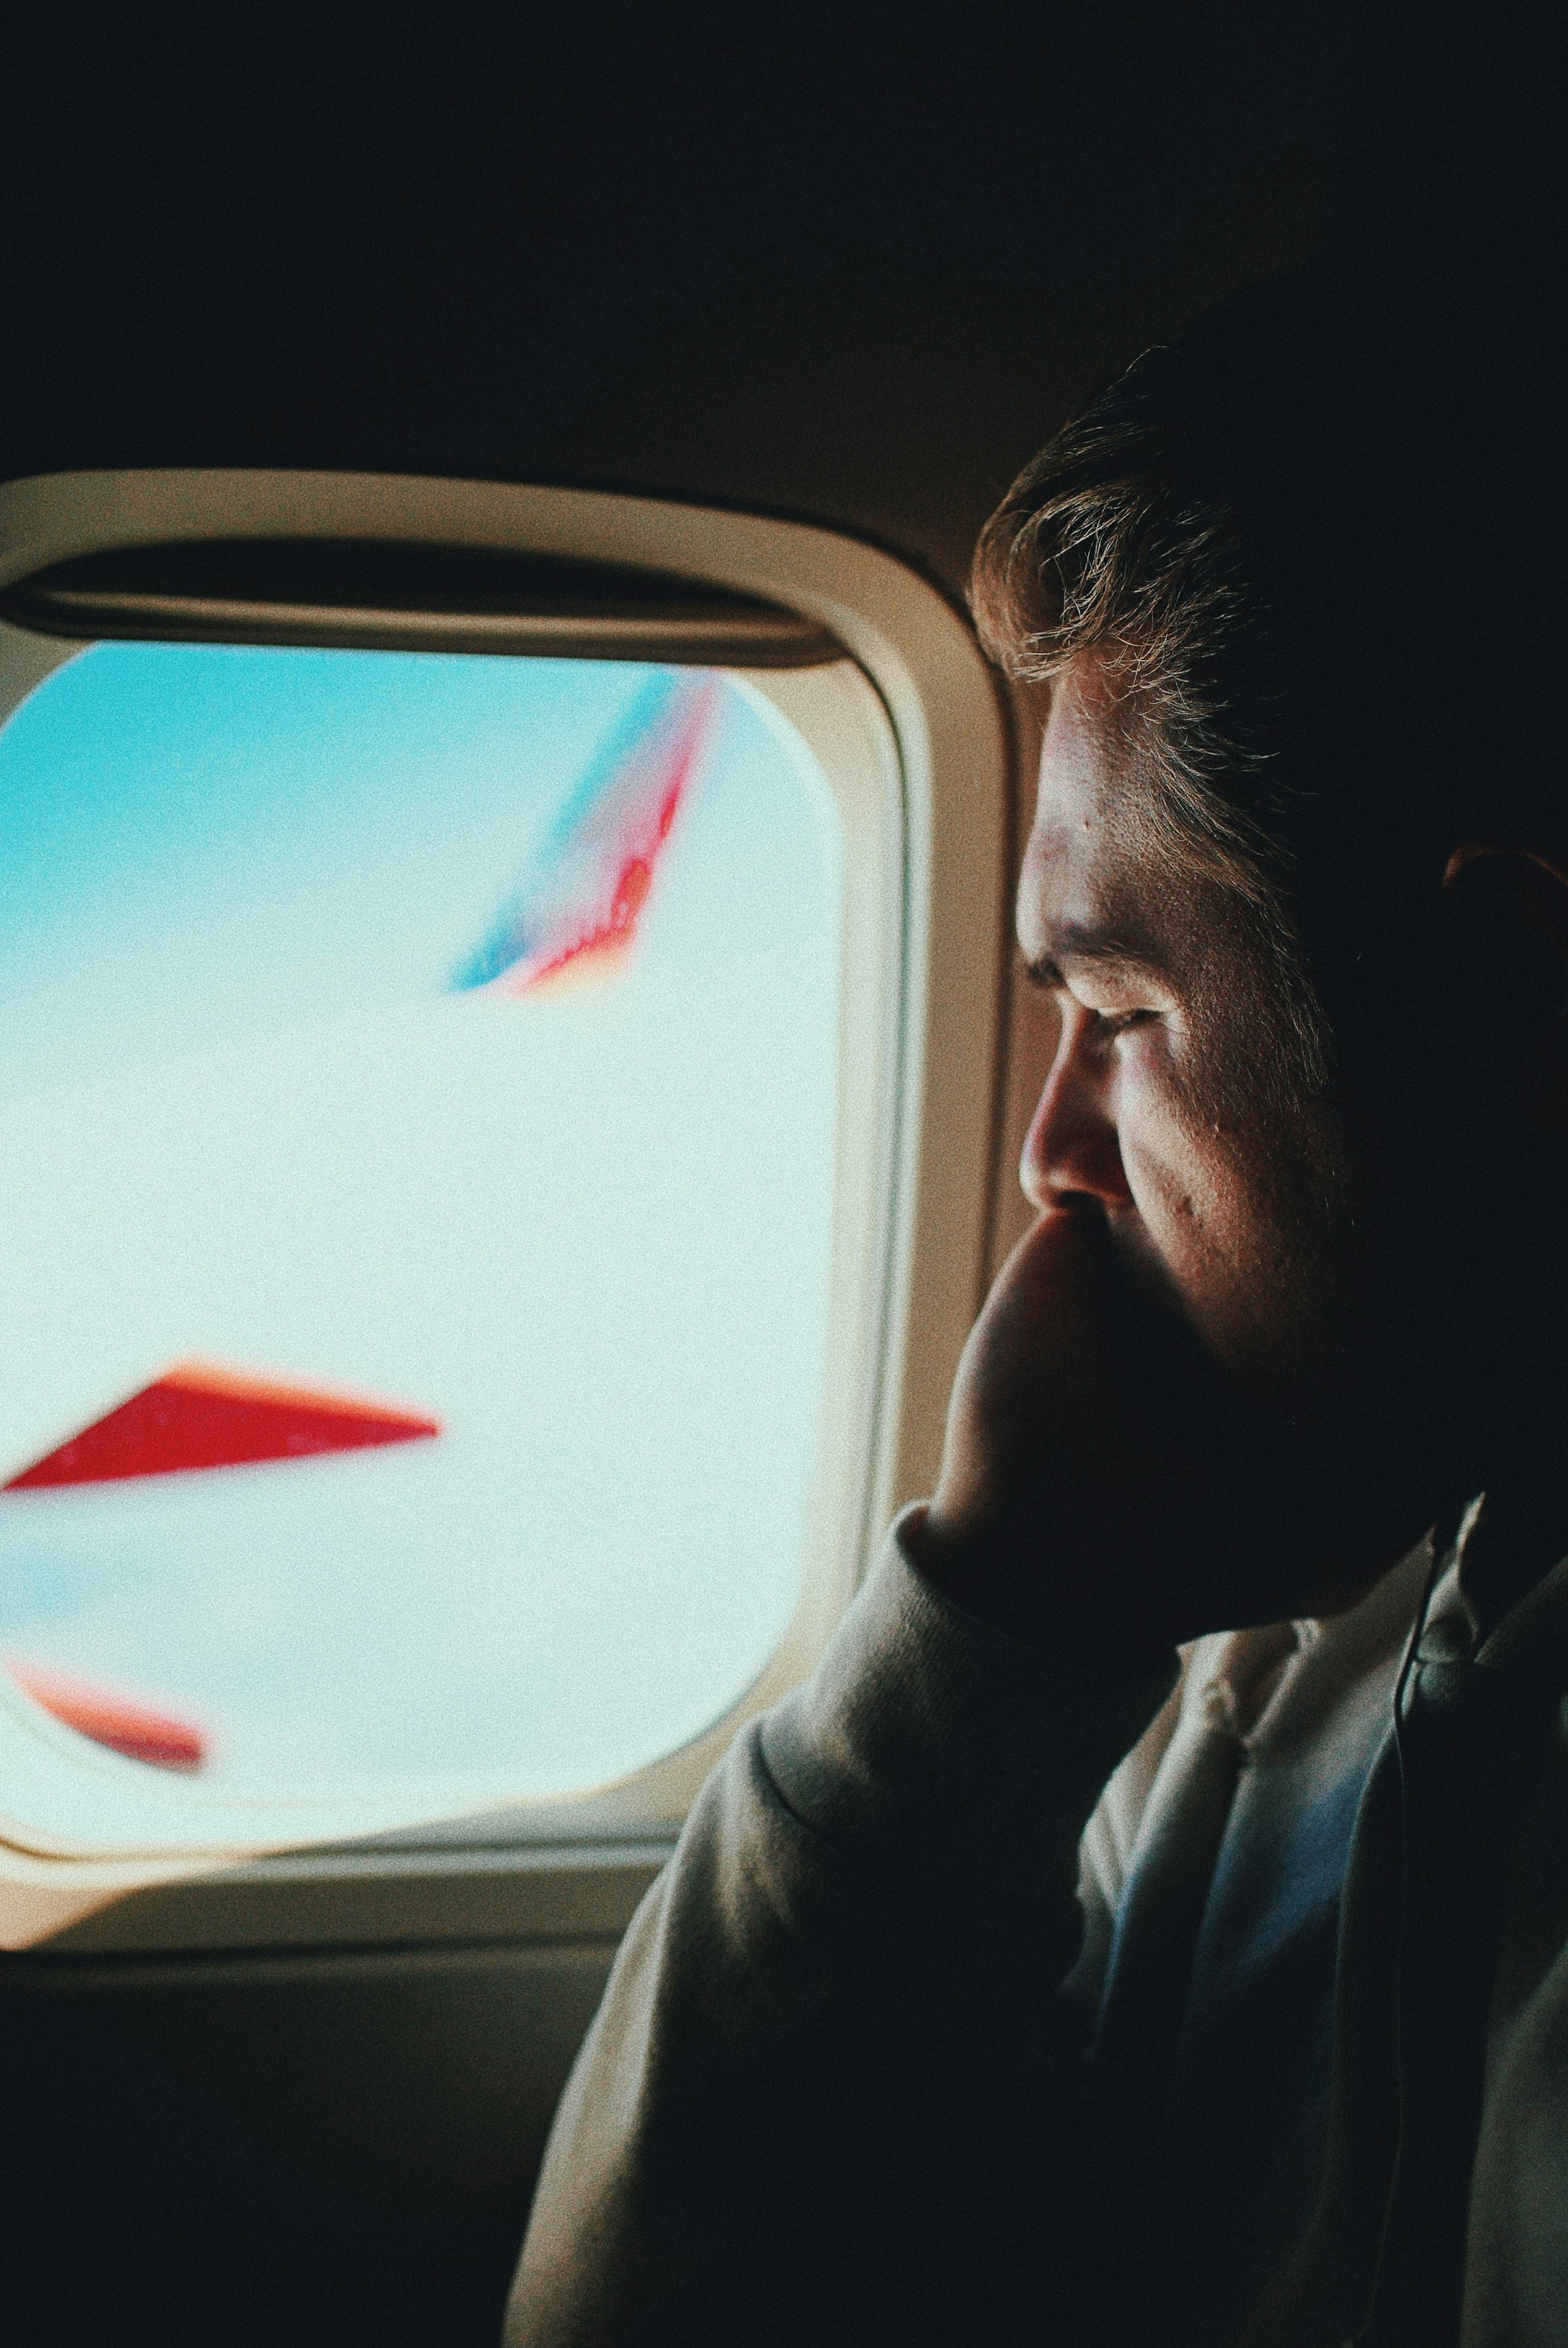 A man in an airplane looking through the window | Source: Unsplash